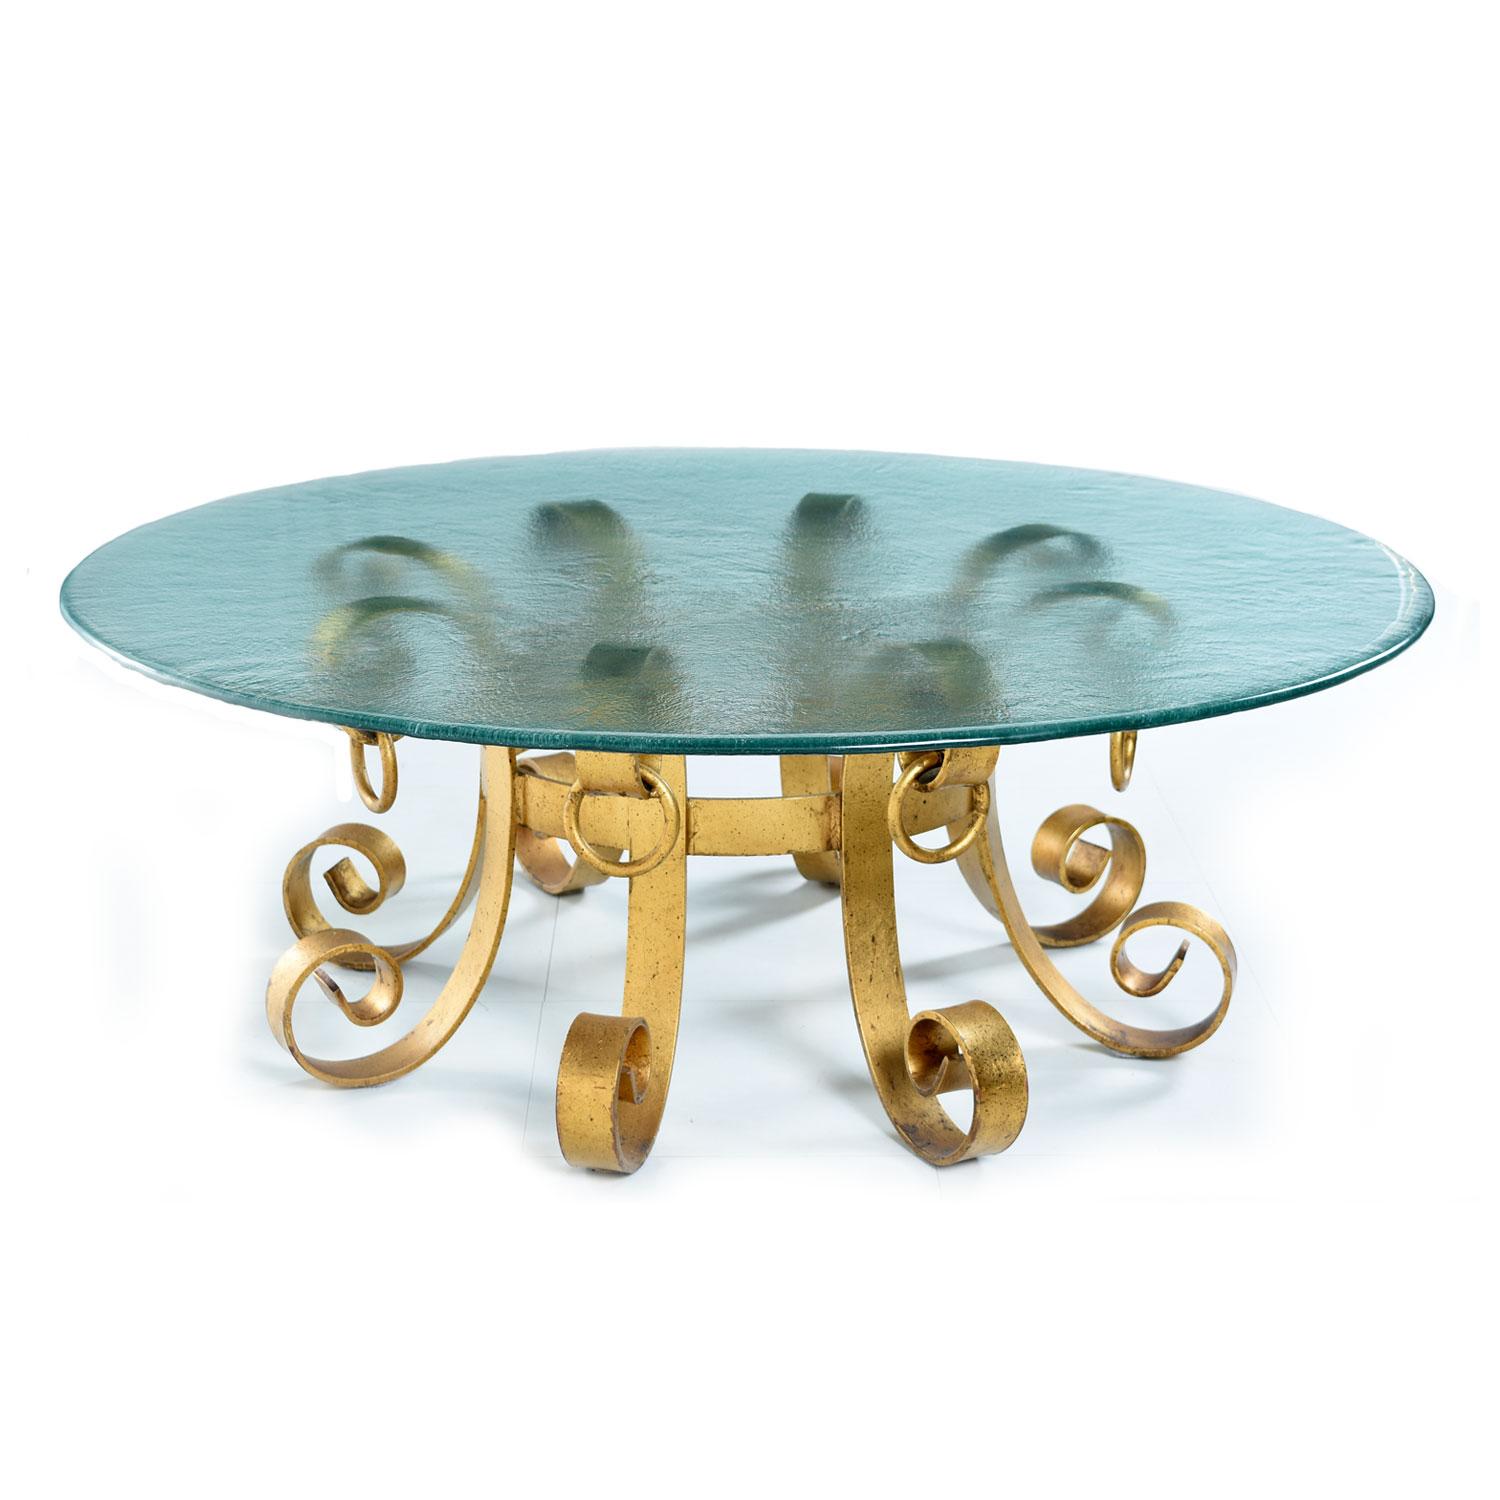 Spectacular vintage Hollywood Regency coffee table with rippled glass top. Heavy, iron metal base gilded with gold and black fleck color paint. Elegant blossoming scroll form with heavy knocker embellishments. Outstanding craftsmanship with